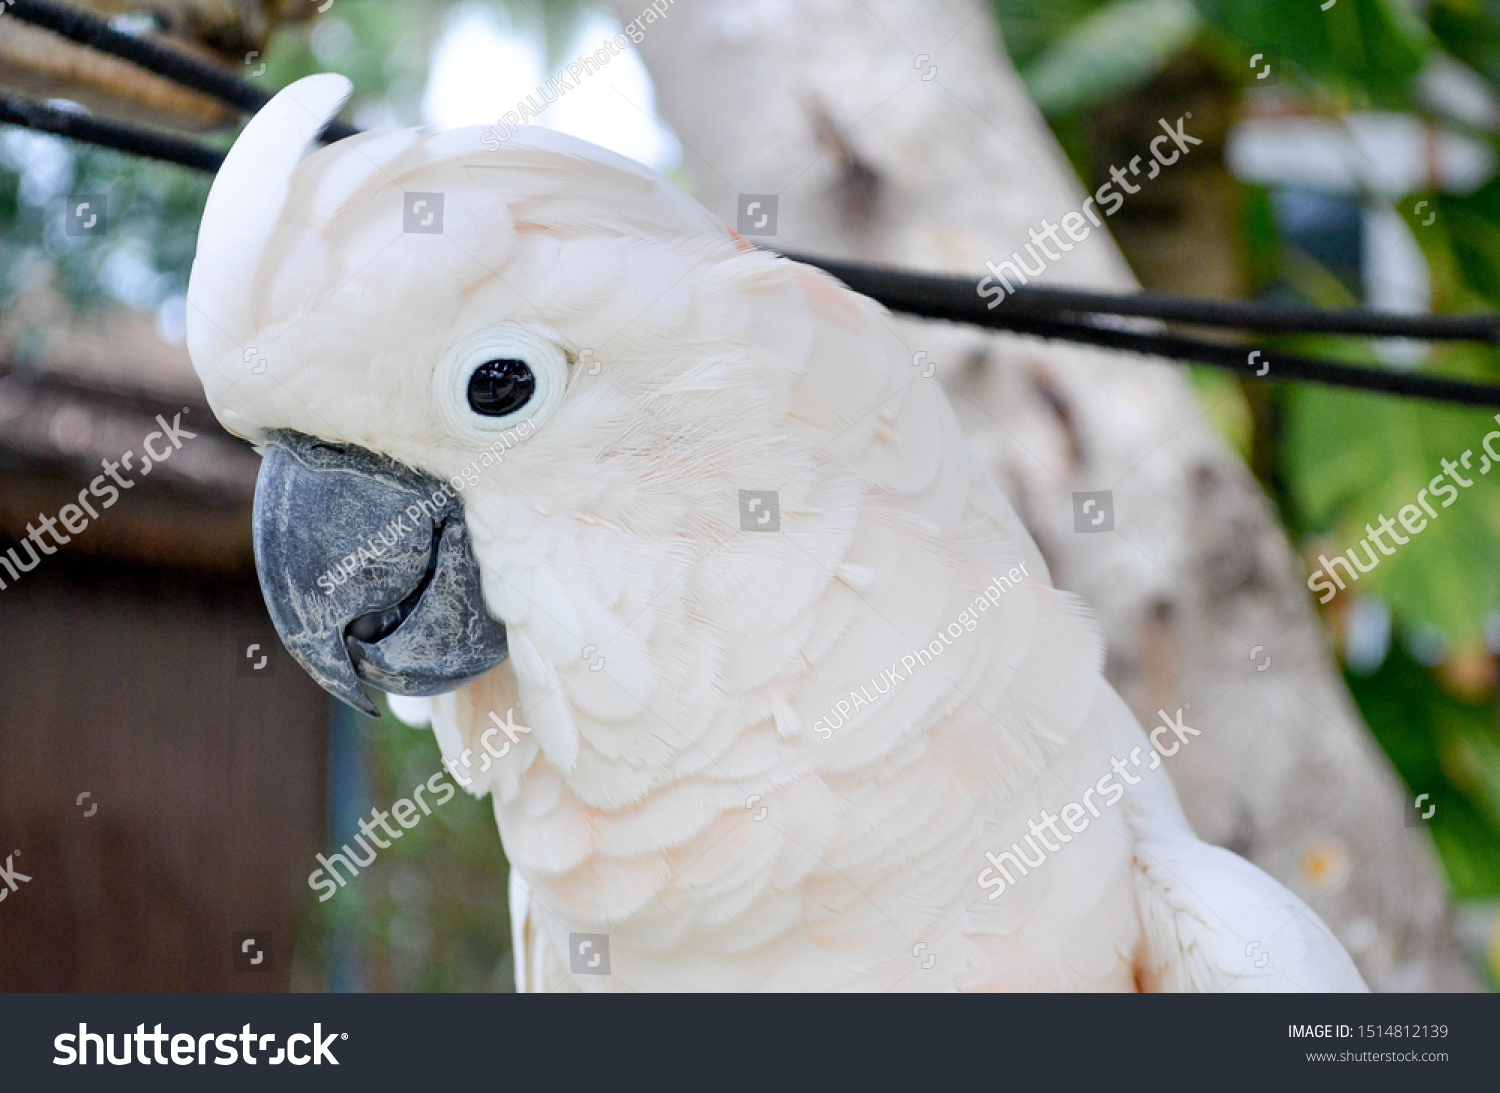 Closeup Picture White Macaw Parrot Stock Photo Edit Now 1514812139,Oatmeal Cookie Shot